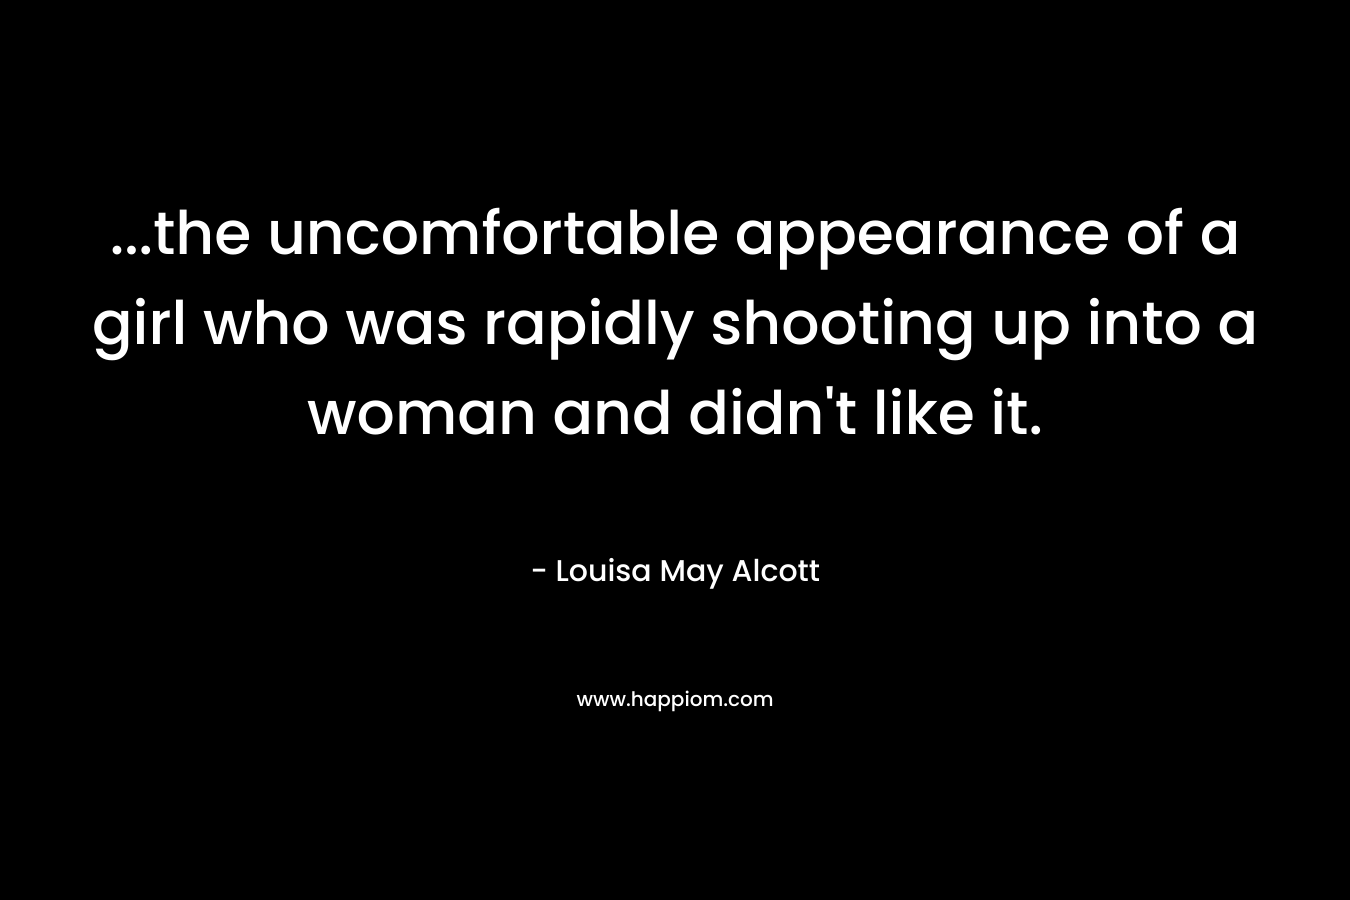 …the uncomfortable appearance of a girl who was rapidly shooting up into a woman and didn’t like it. – Louisa May Alcott